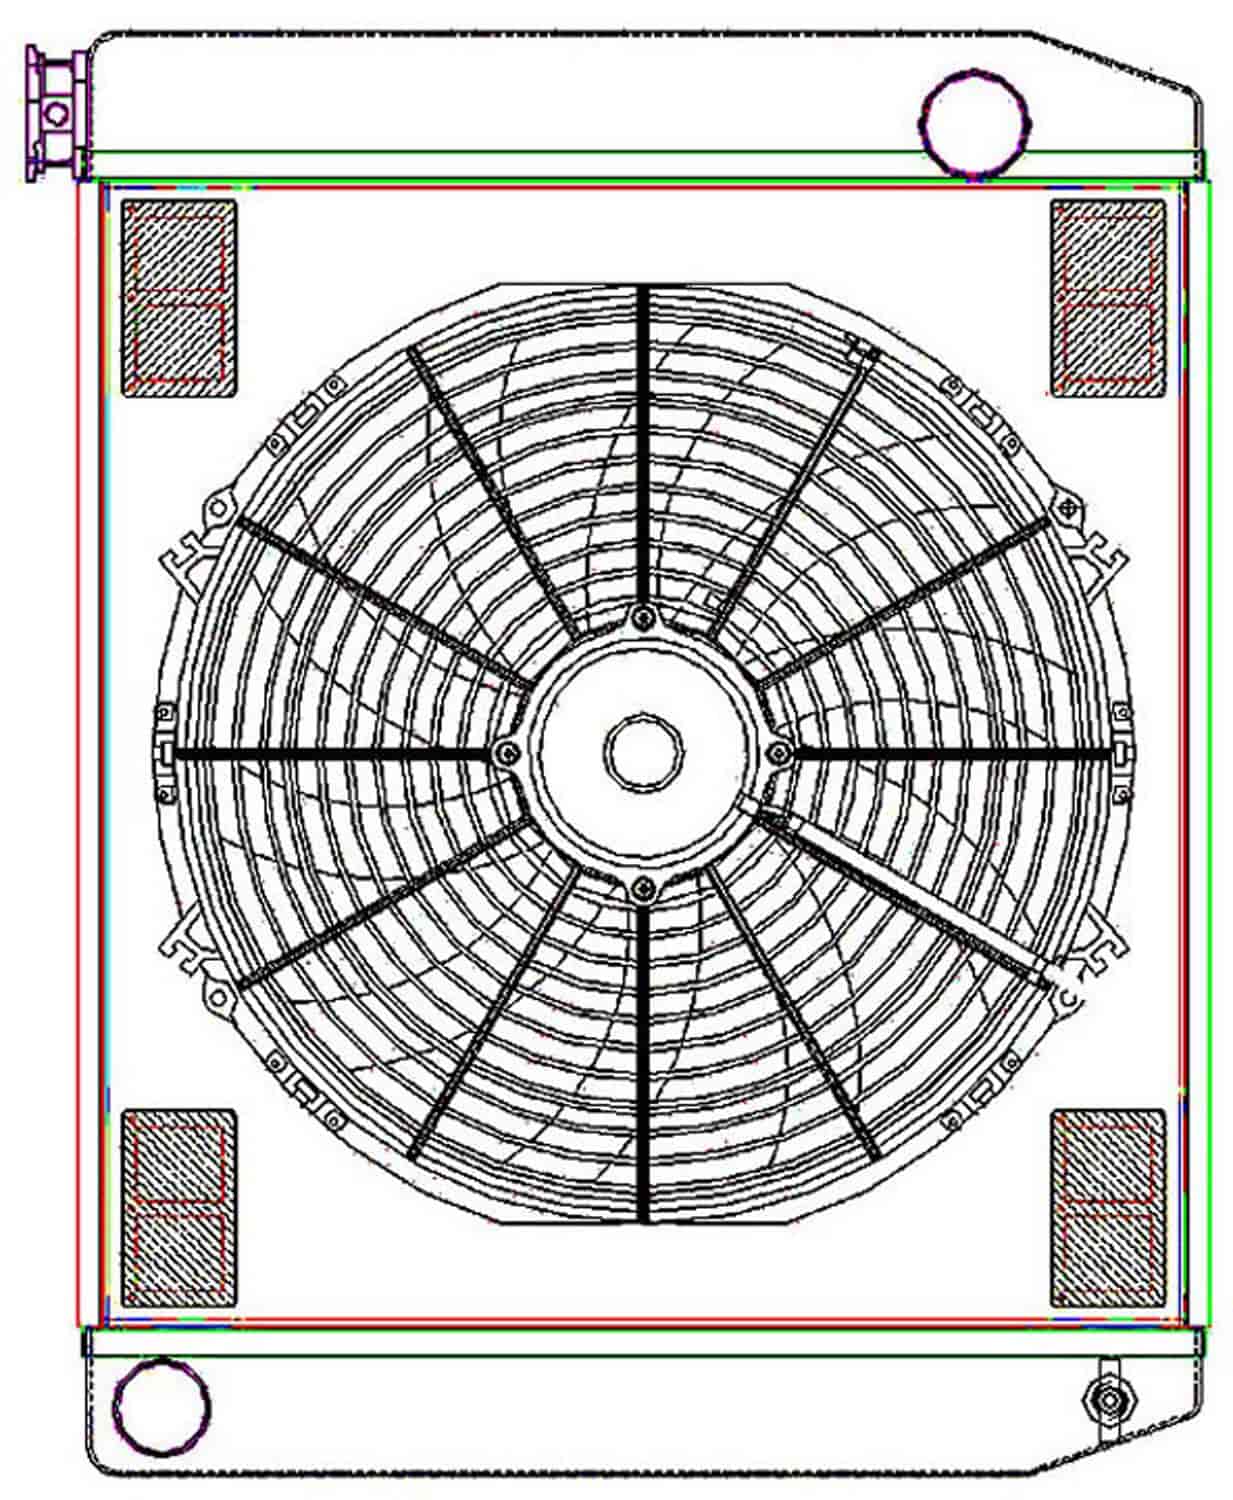 ClassicCool ComboUnit Universal Fit Radiator and Fan Single Pass Crossflow Design 24" x 19" with Straight Outlet